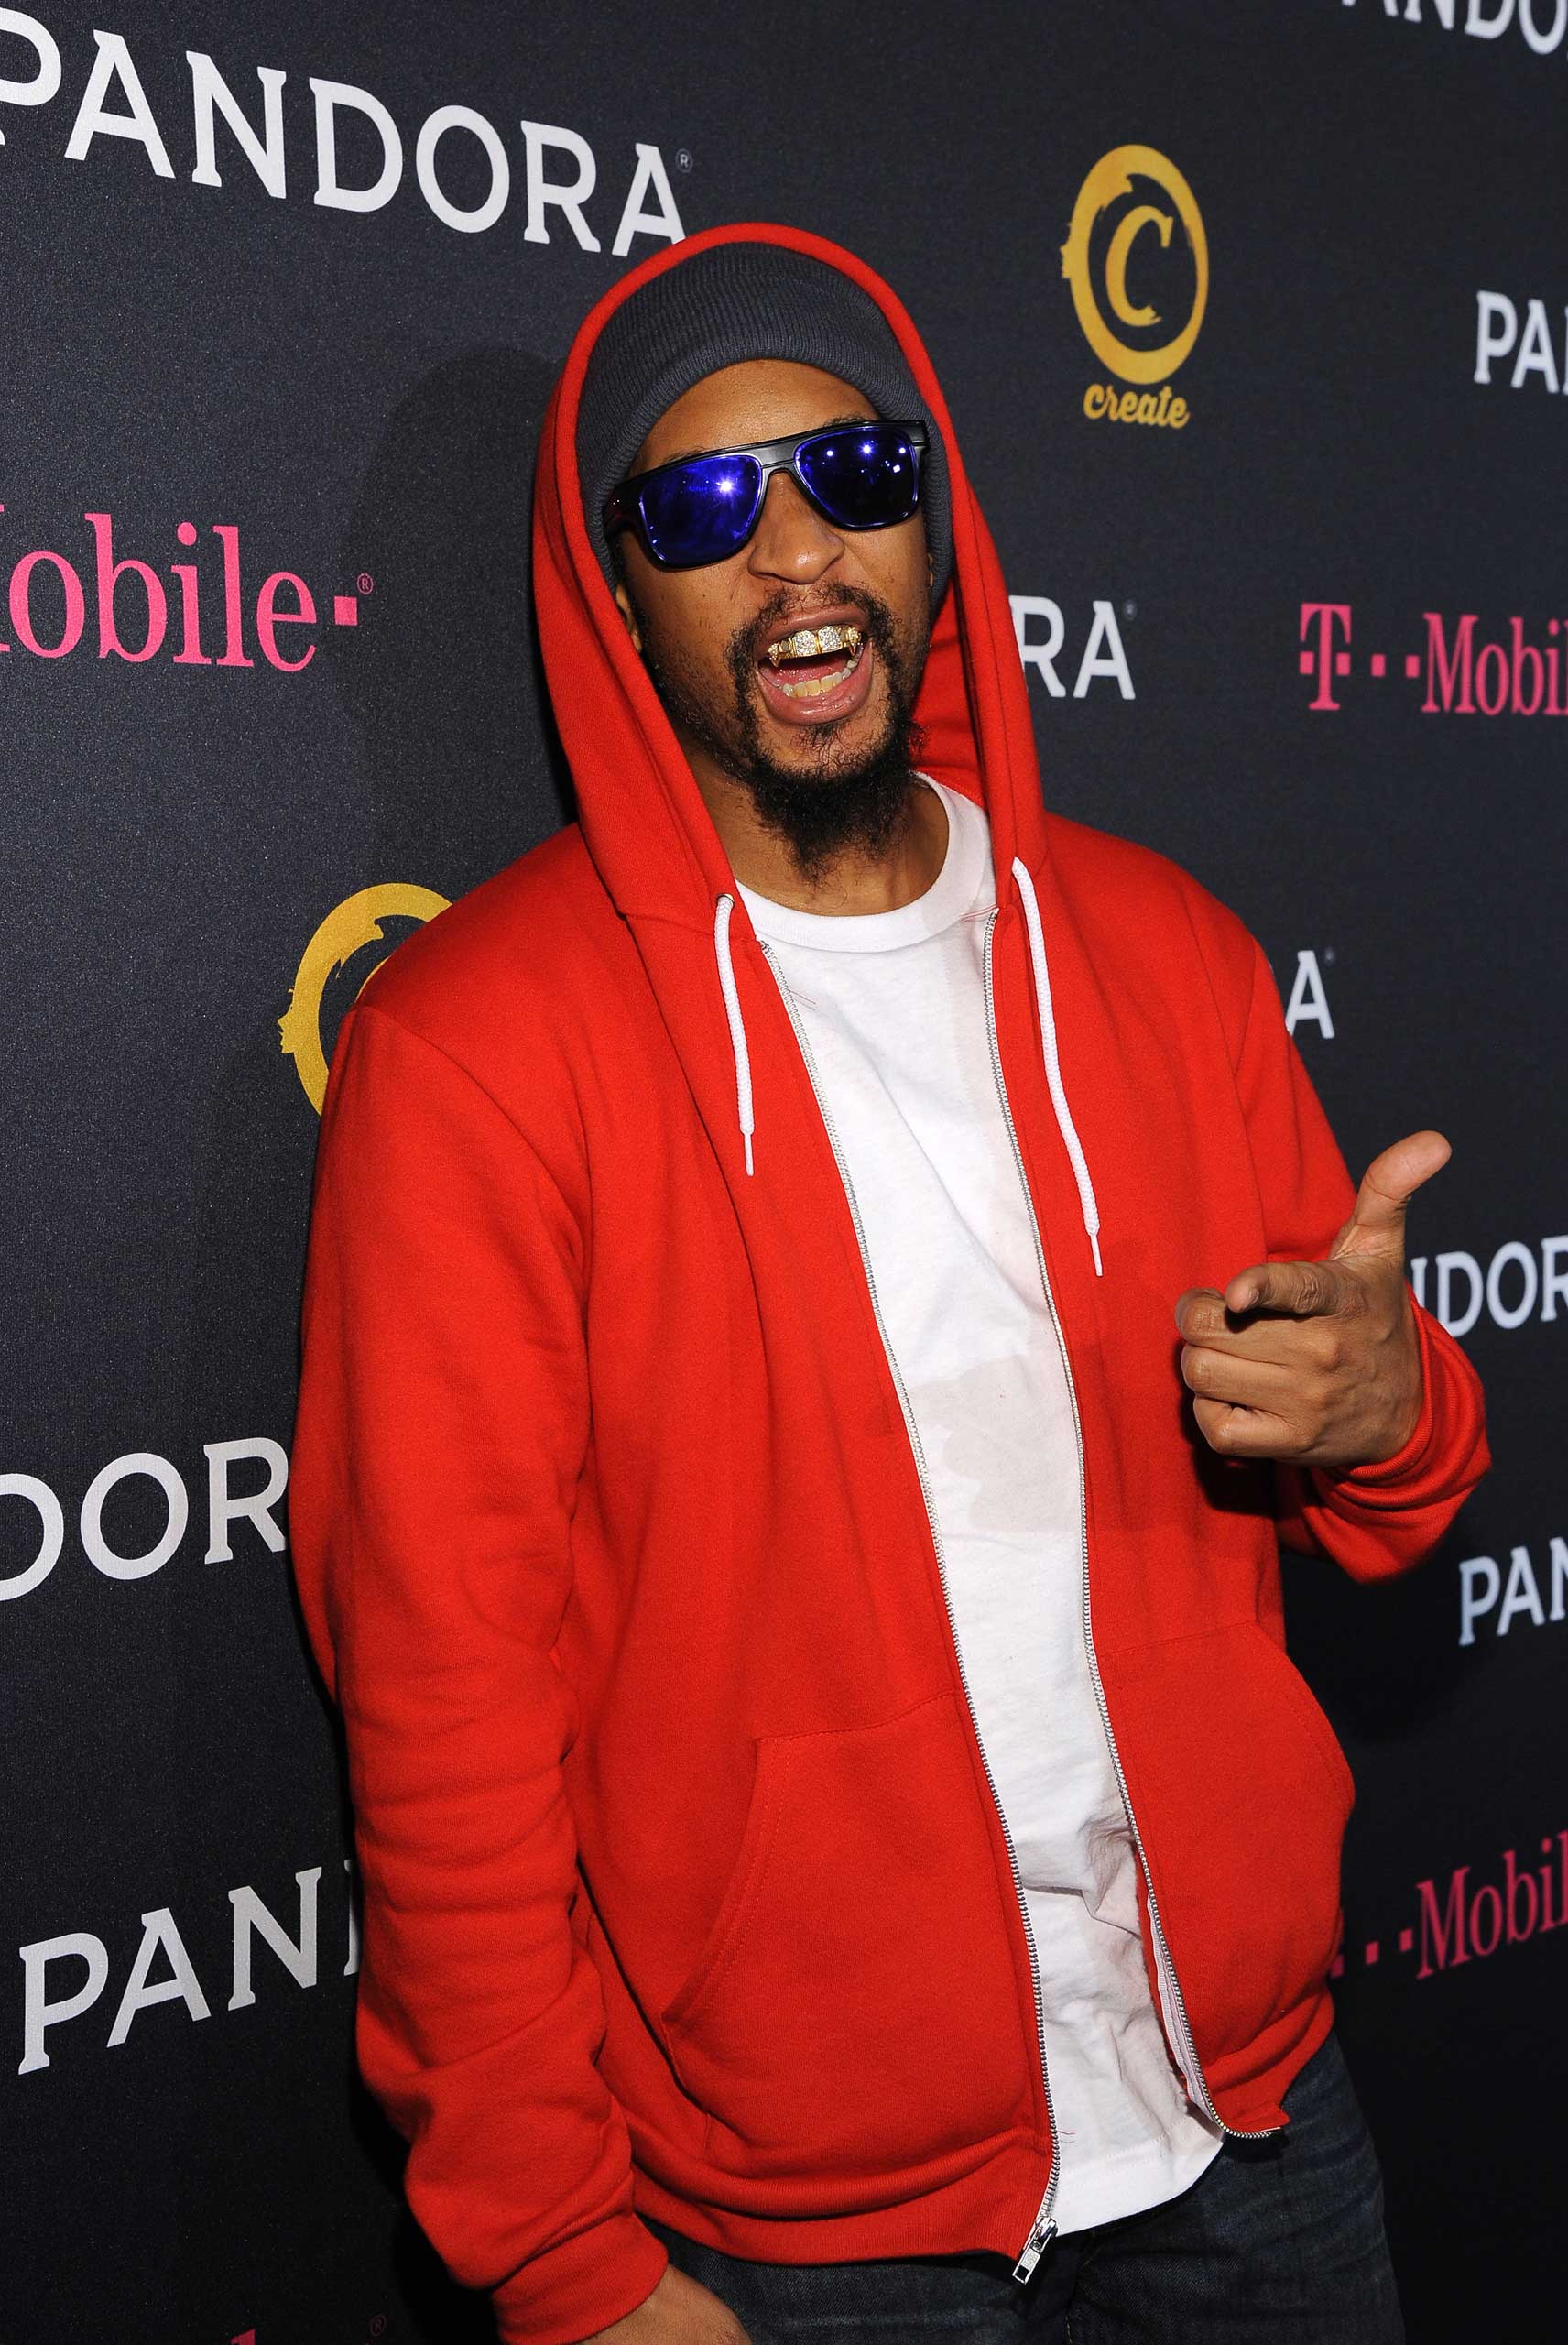 Rapper Lil Jon arrives for the PANDORA GRAMMY after party featuring Lil Jon in Hollywood, on Feb 8, 2015